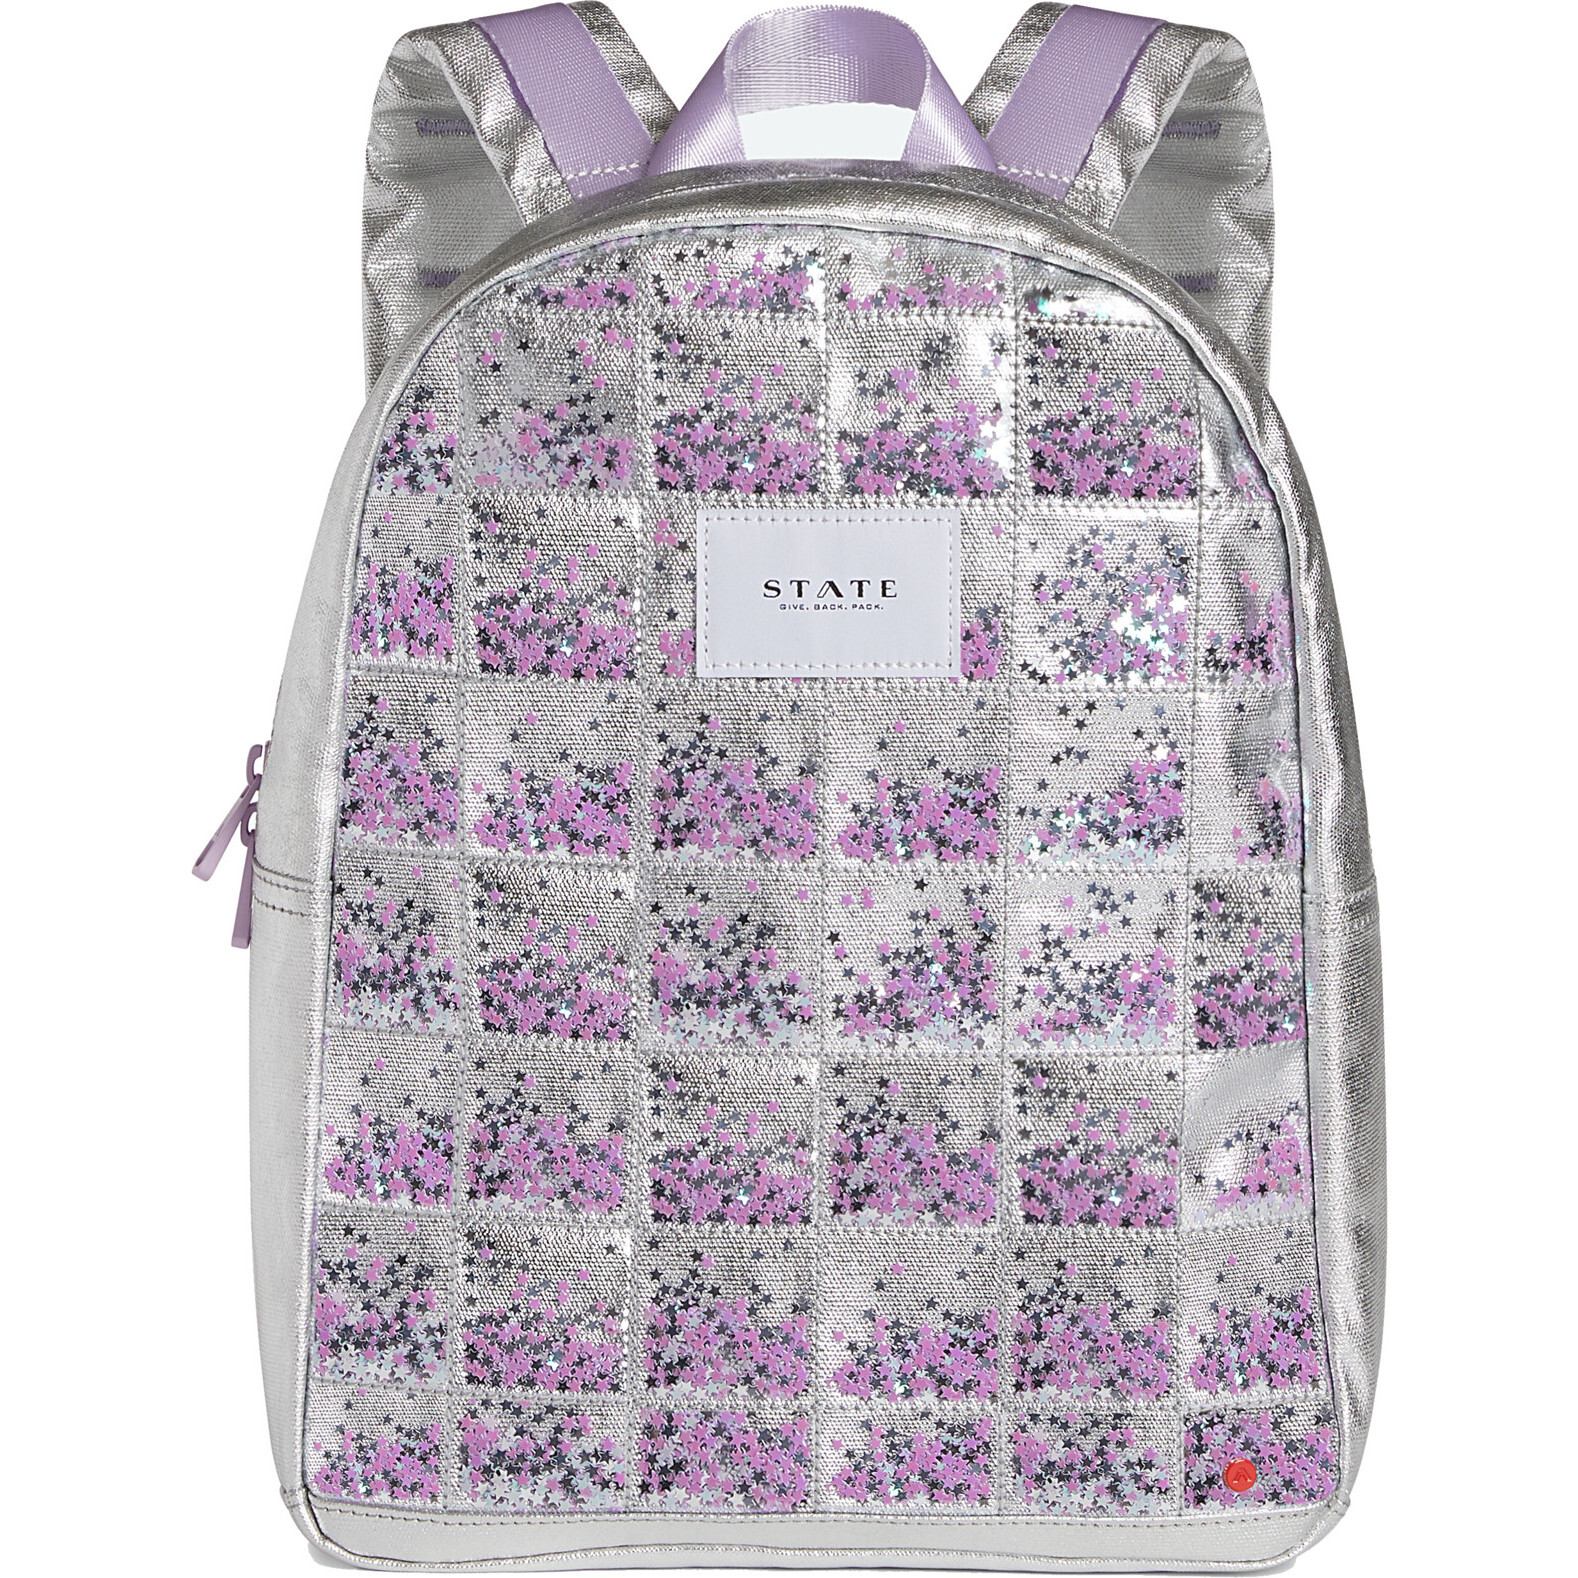 Double shoulder bag for Male and Female Male Female Students The School  Season Backpack Leisure Campus Bag Youth Fashion Large Capacity School Bag  Purple - Walmart.com